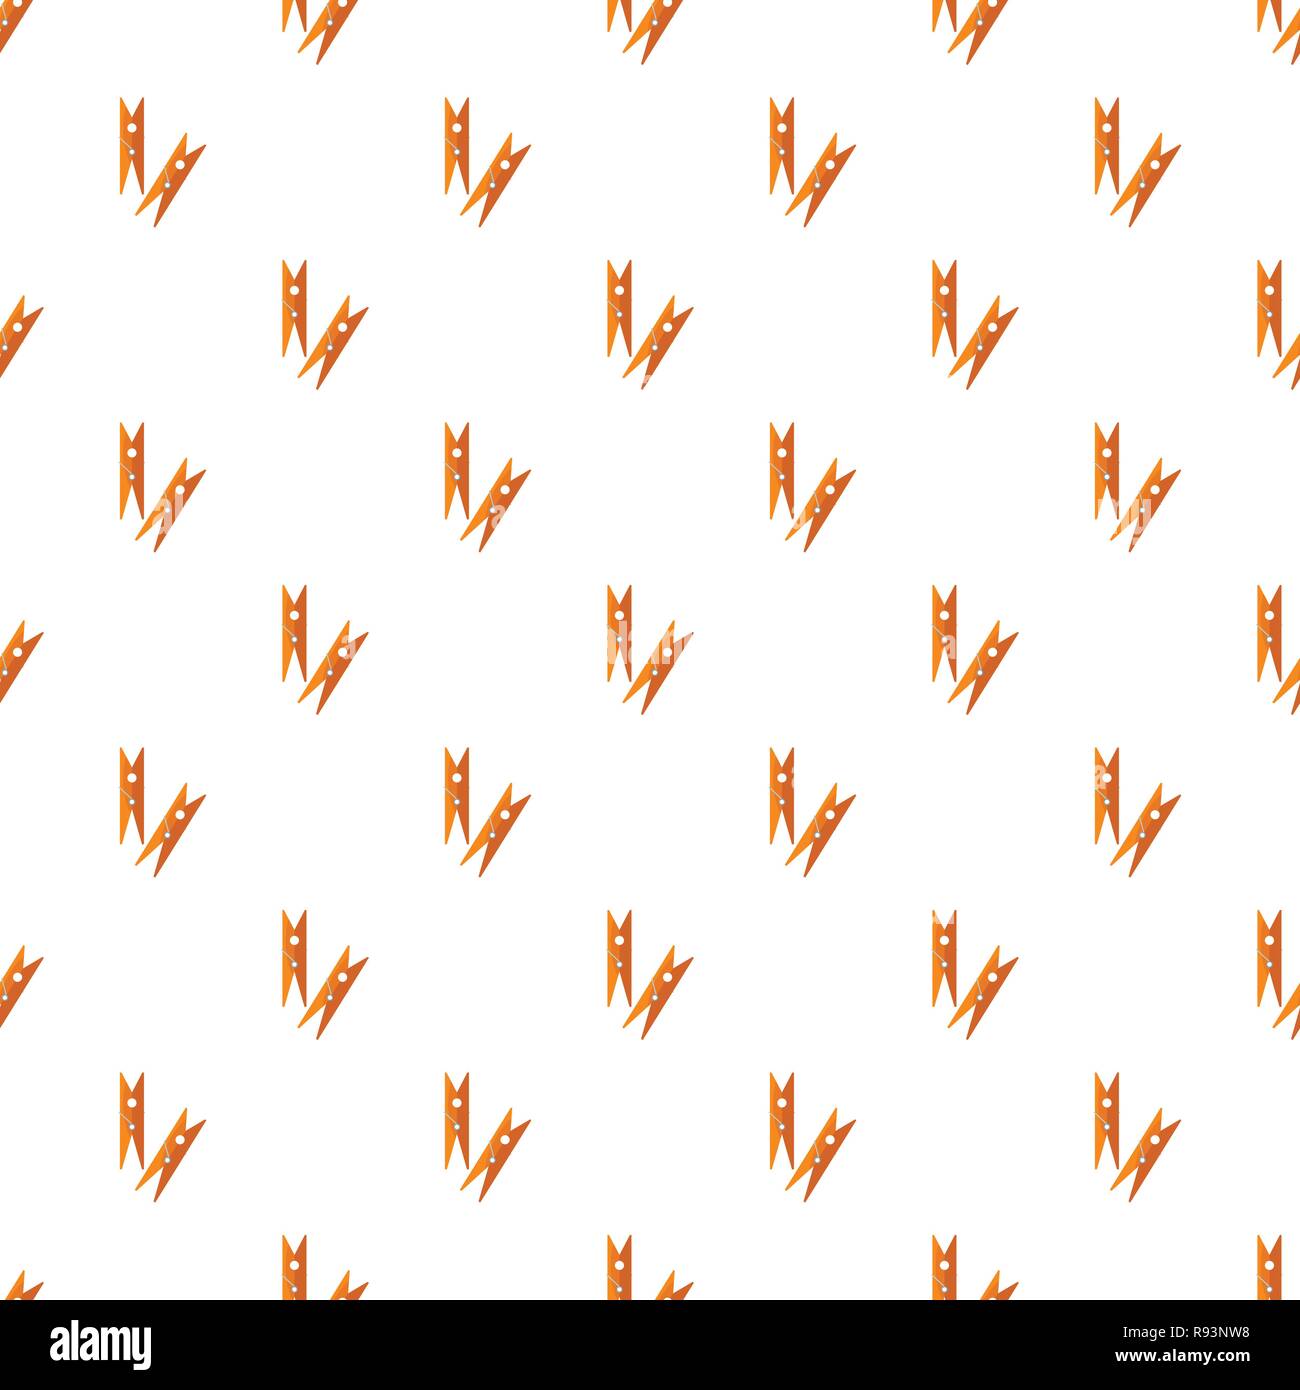 Peg clothes pattern seamless vector repeat for any web design Stock Vector